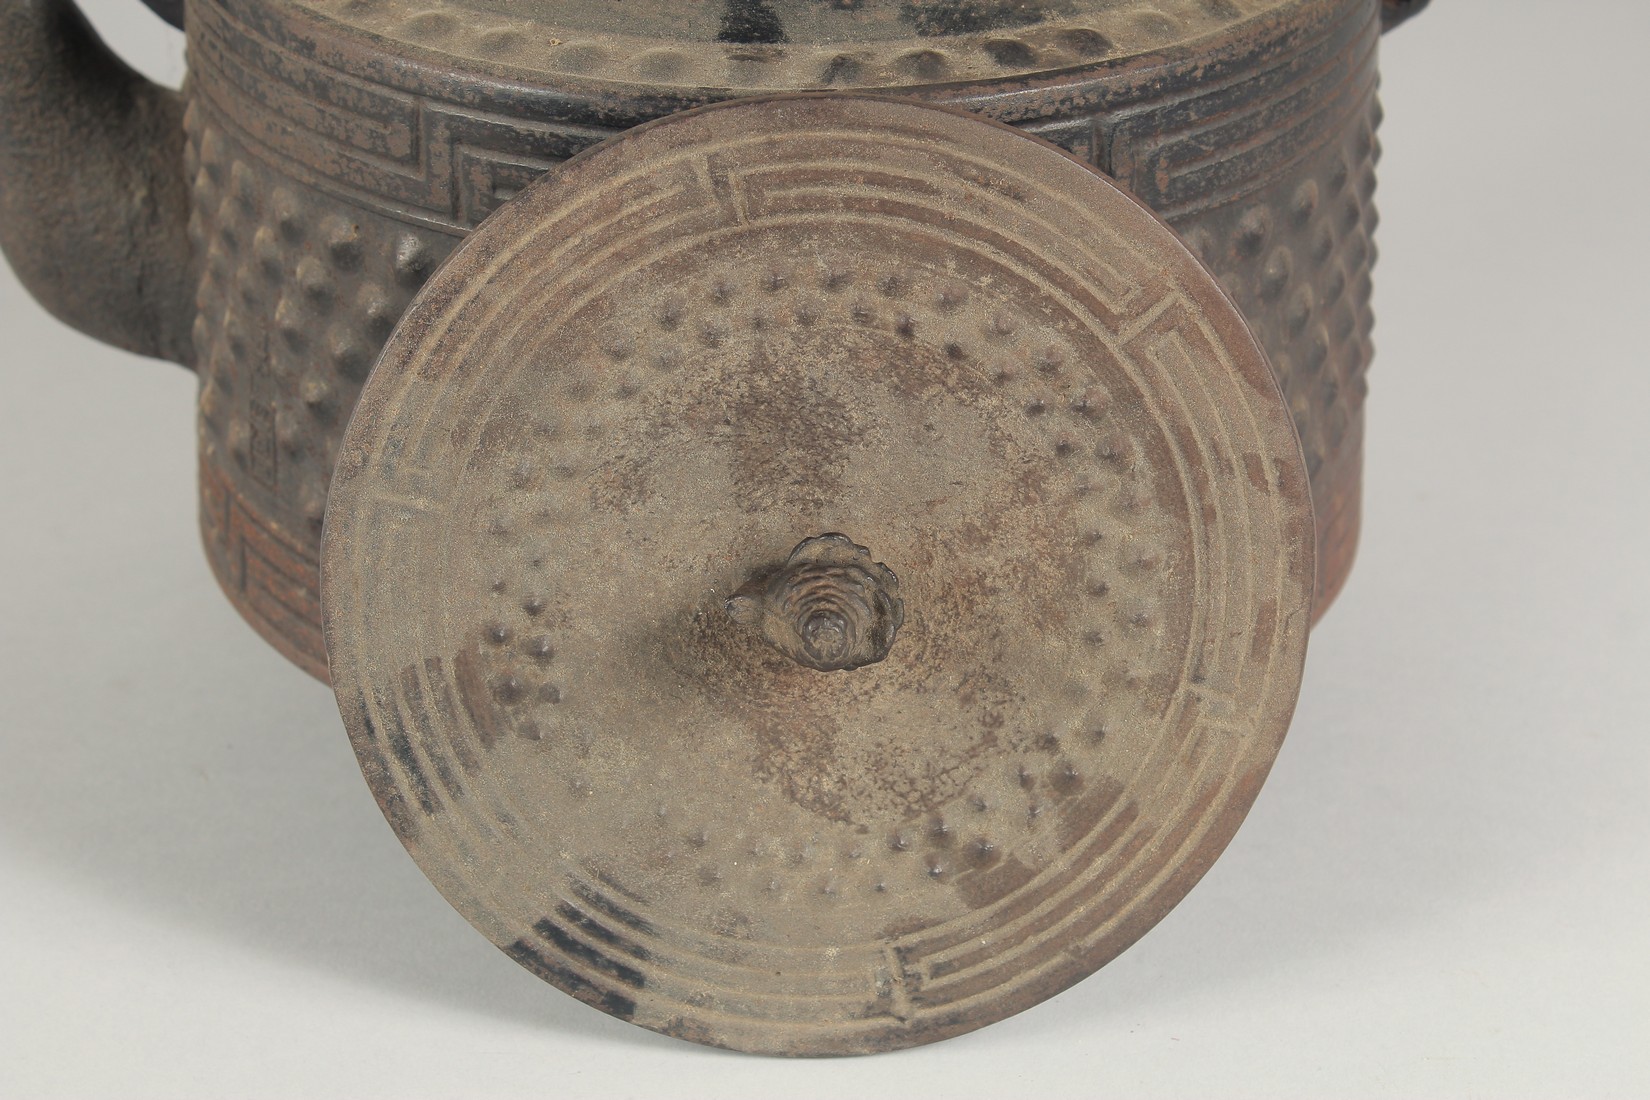 A LARGE 19TH CENTURY JAPANESE CAST IRON TETSUBIN / KETTLE, designed with bands of raised bosses, - Image 5 of 6